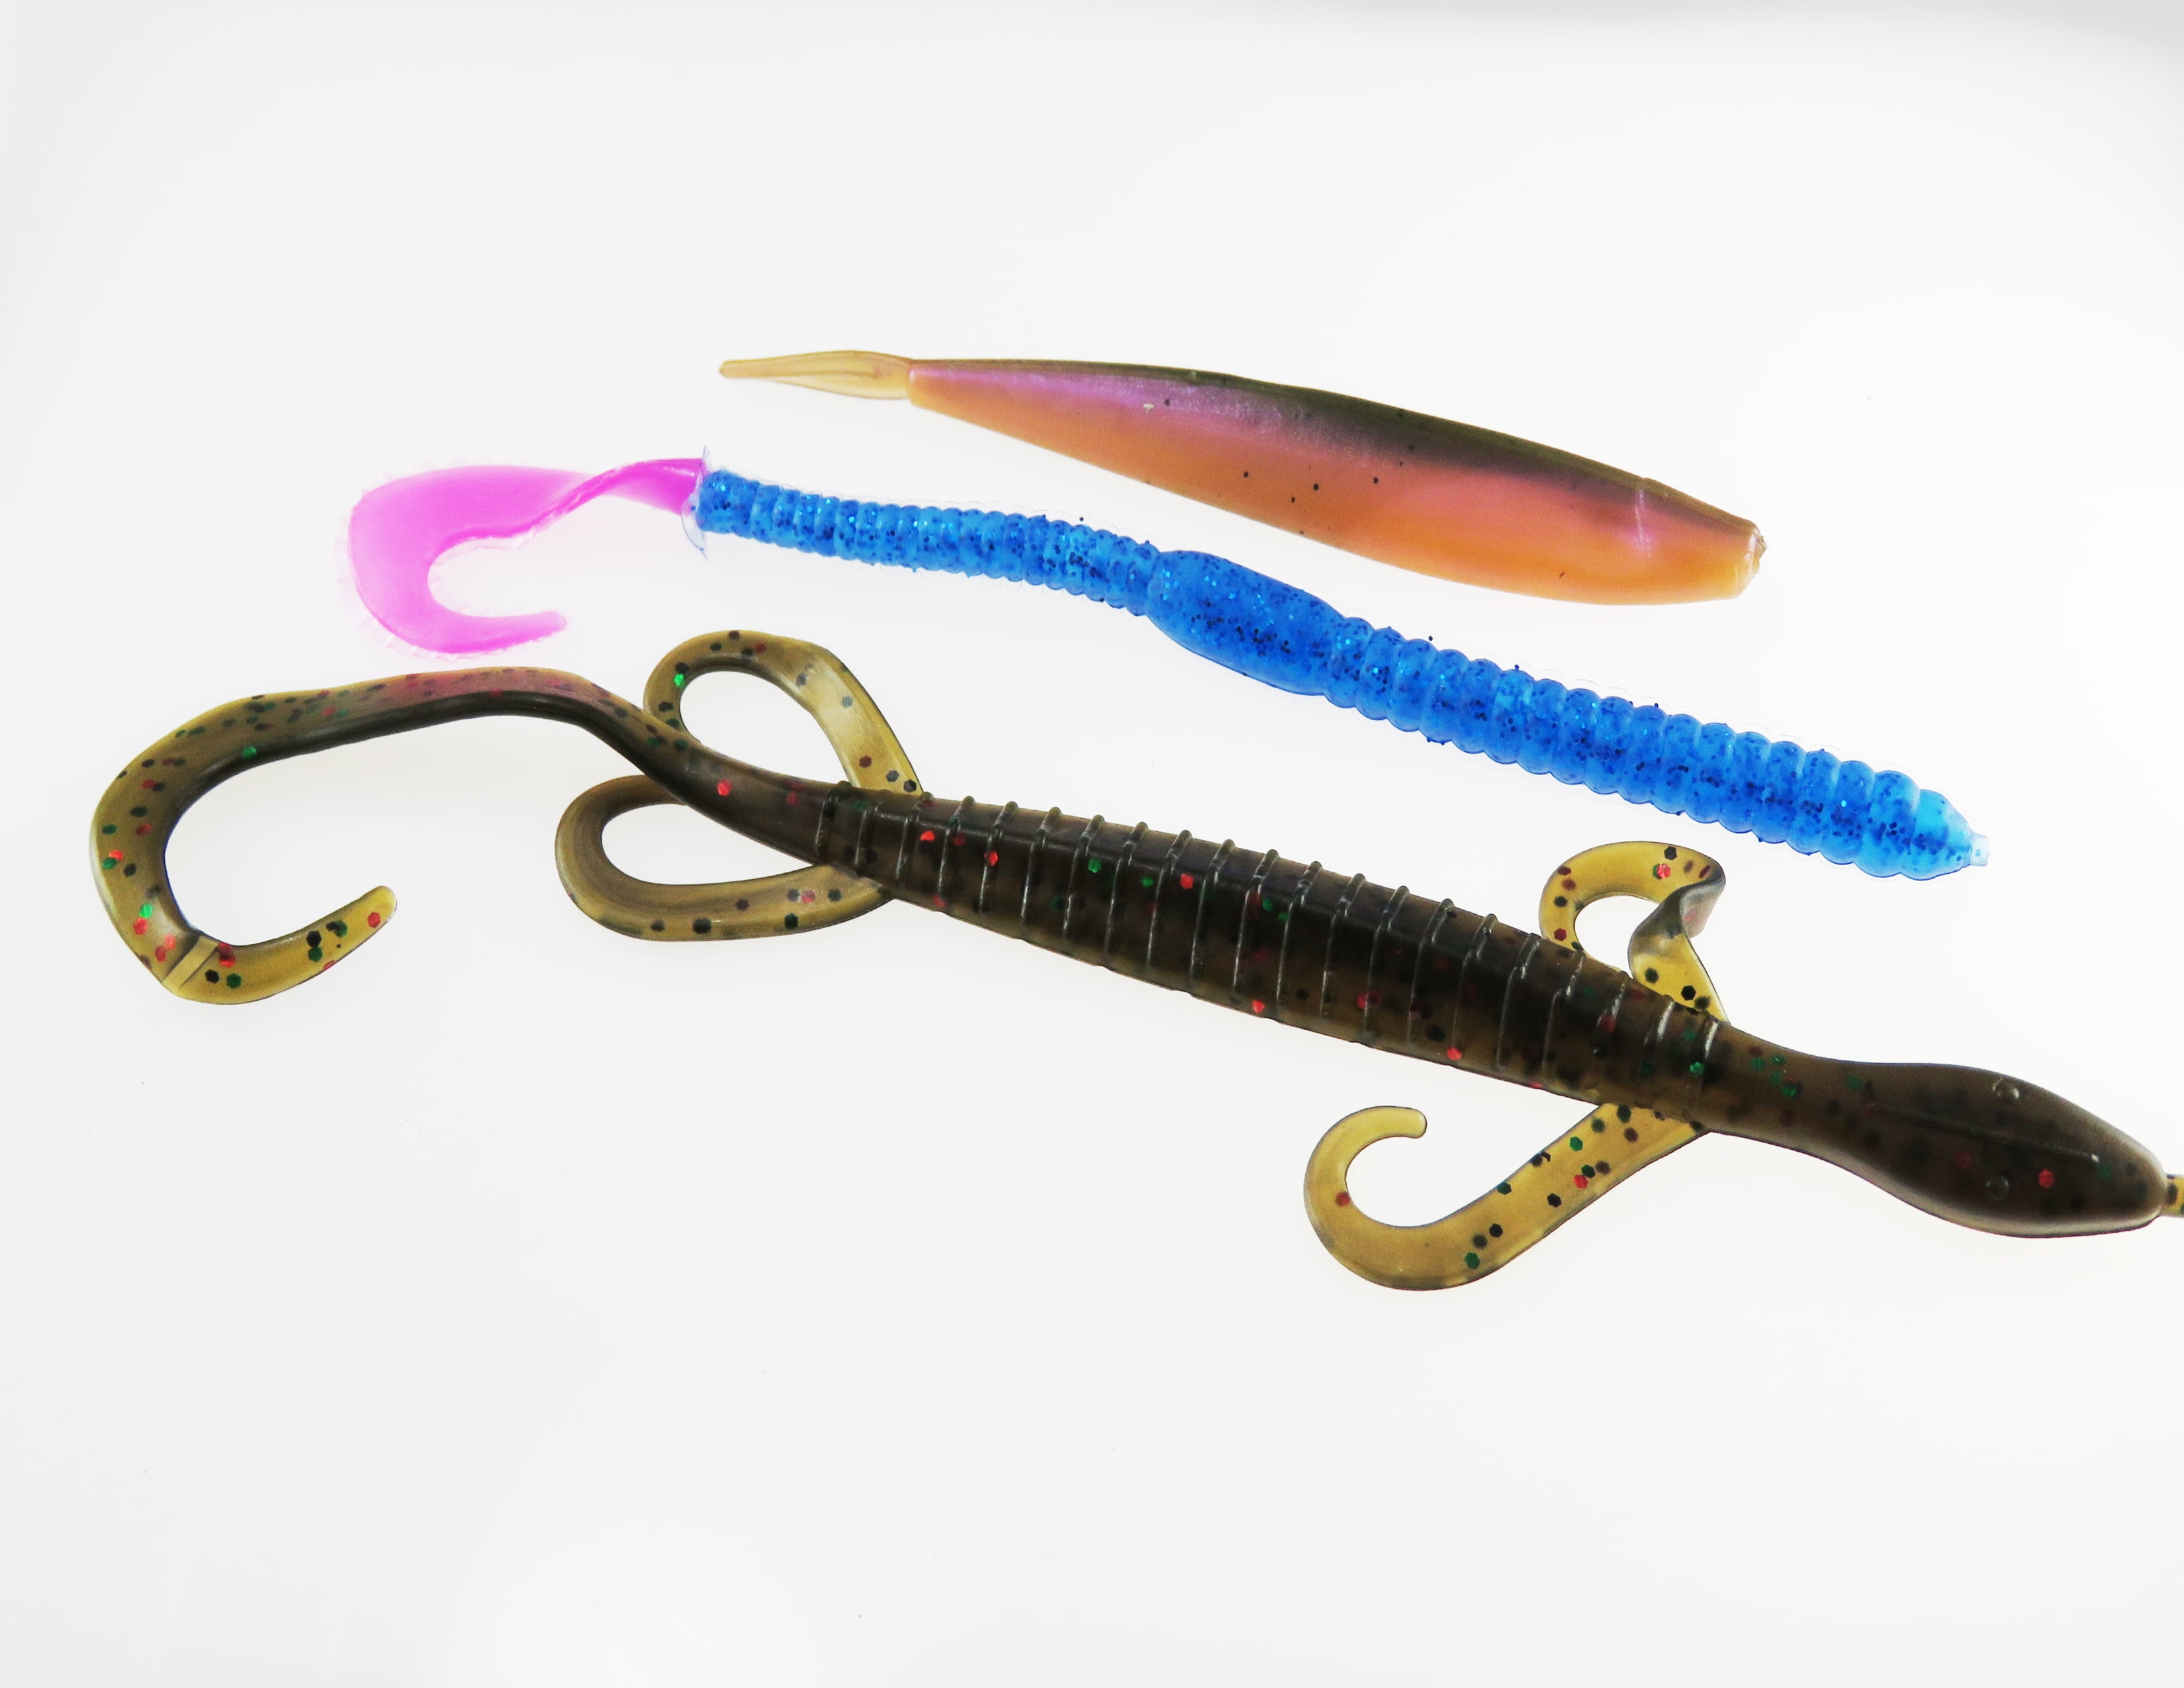 K&E Fish Lures Soft Bass Stopper Worm 5 inch June Bug on PopScreen